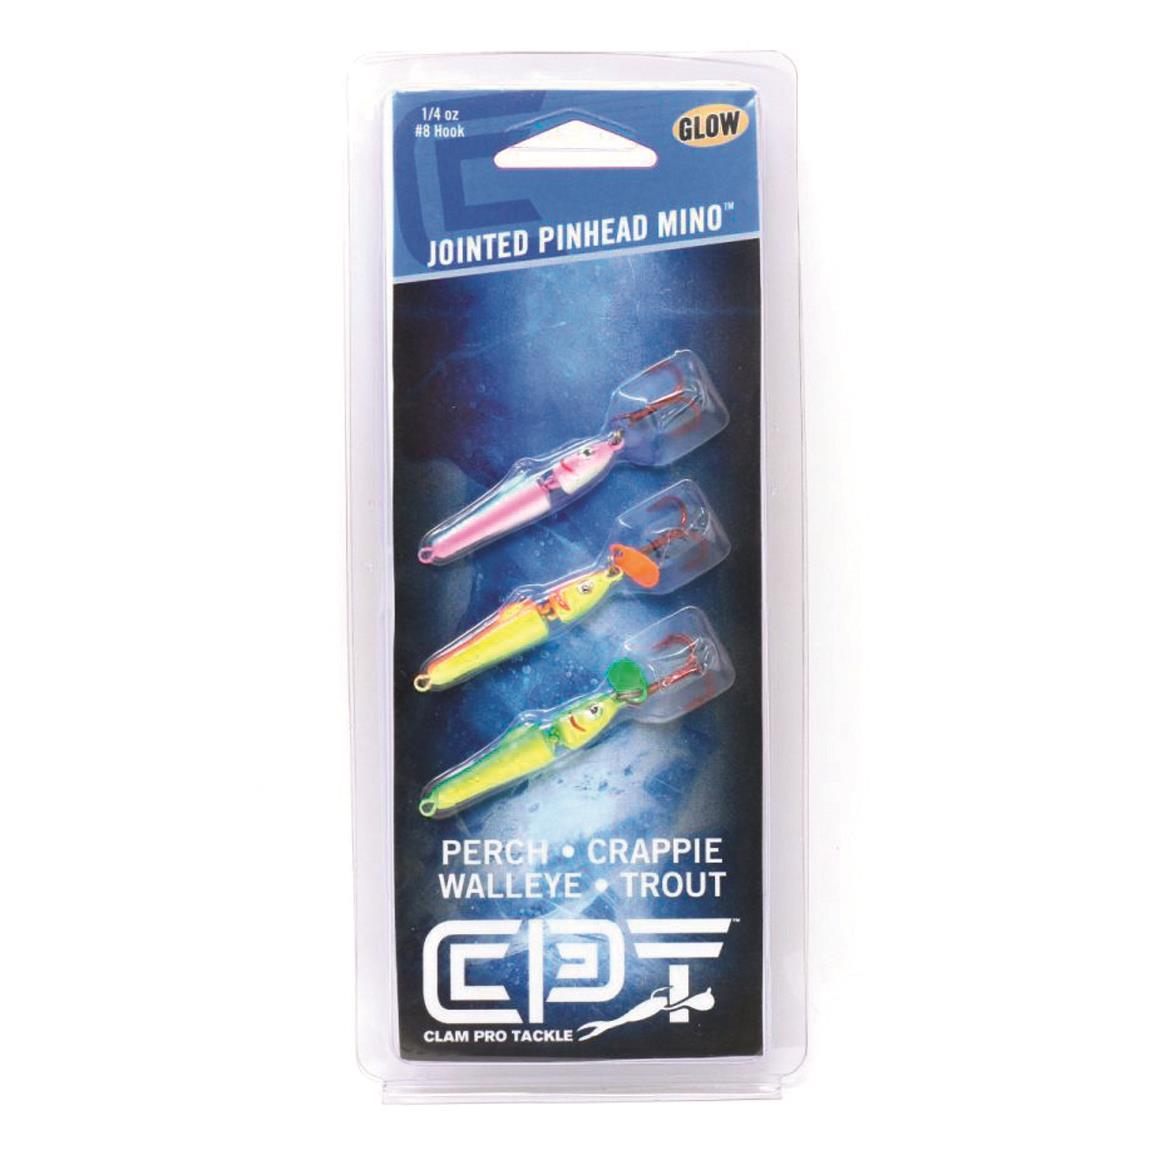 Clam Pro Tackle Jointed Pinhead Jigging Mino Spoon Kit, 1/4 oz.